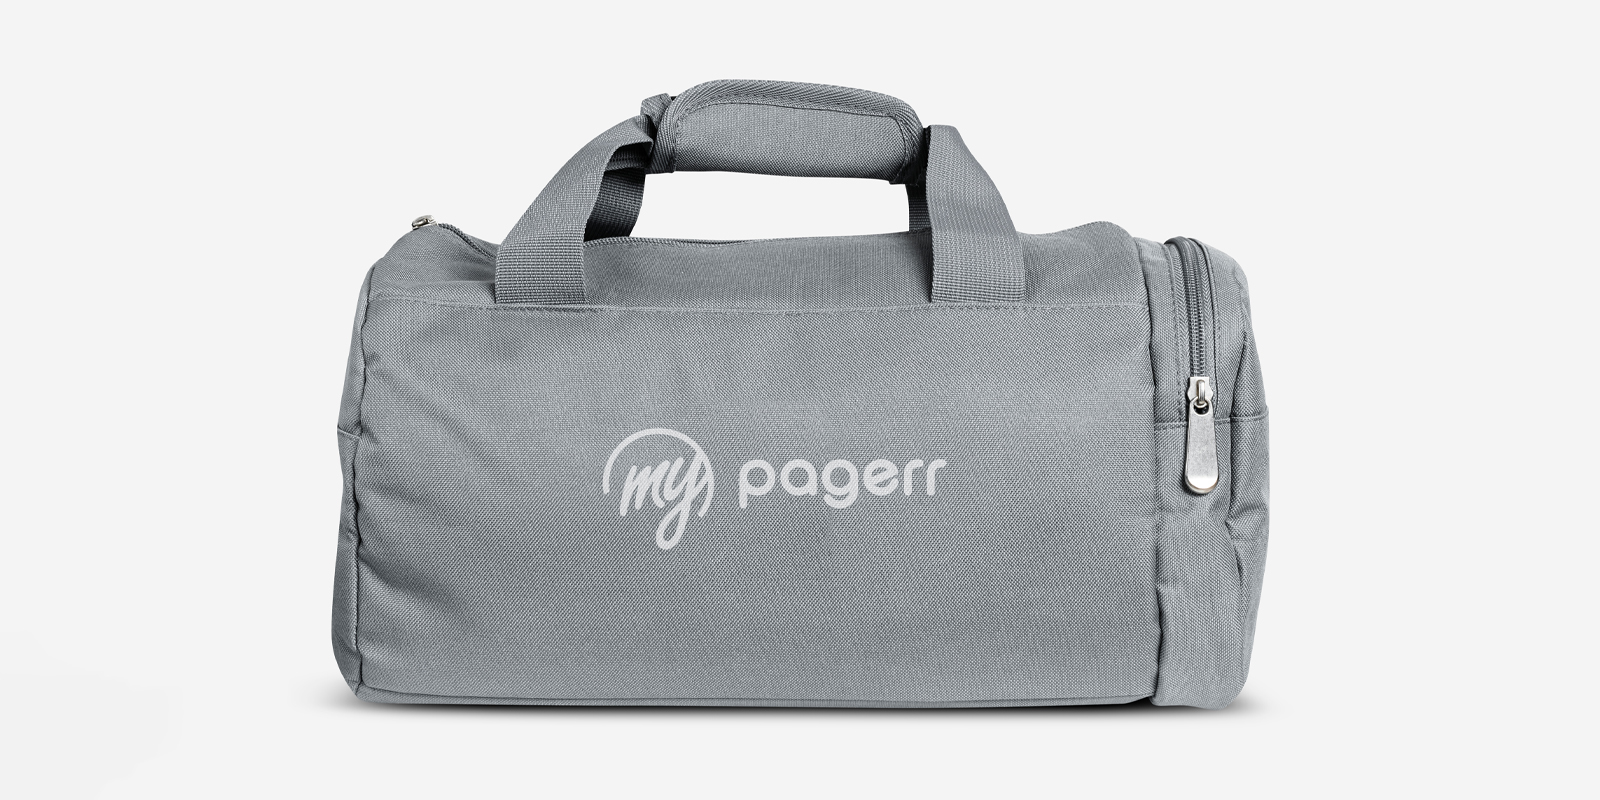 Duffel & gym bags in Vilnius - Print with Pagerr